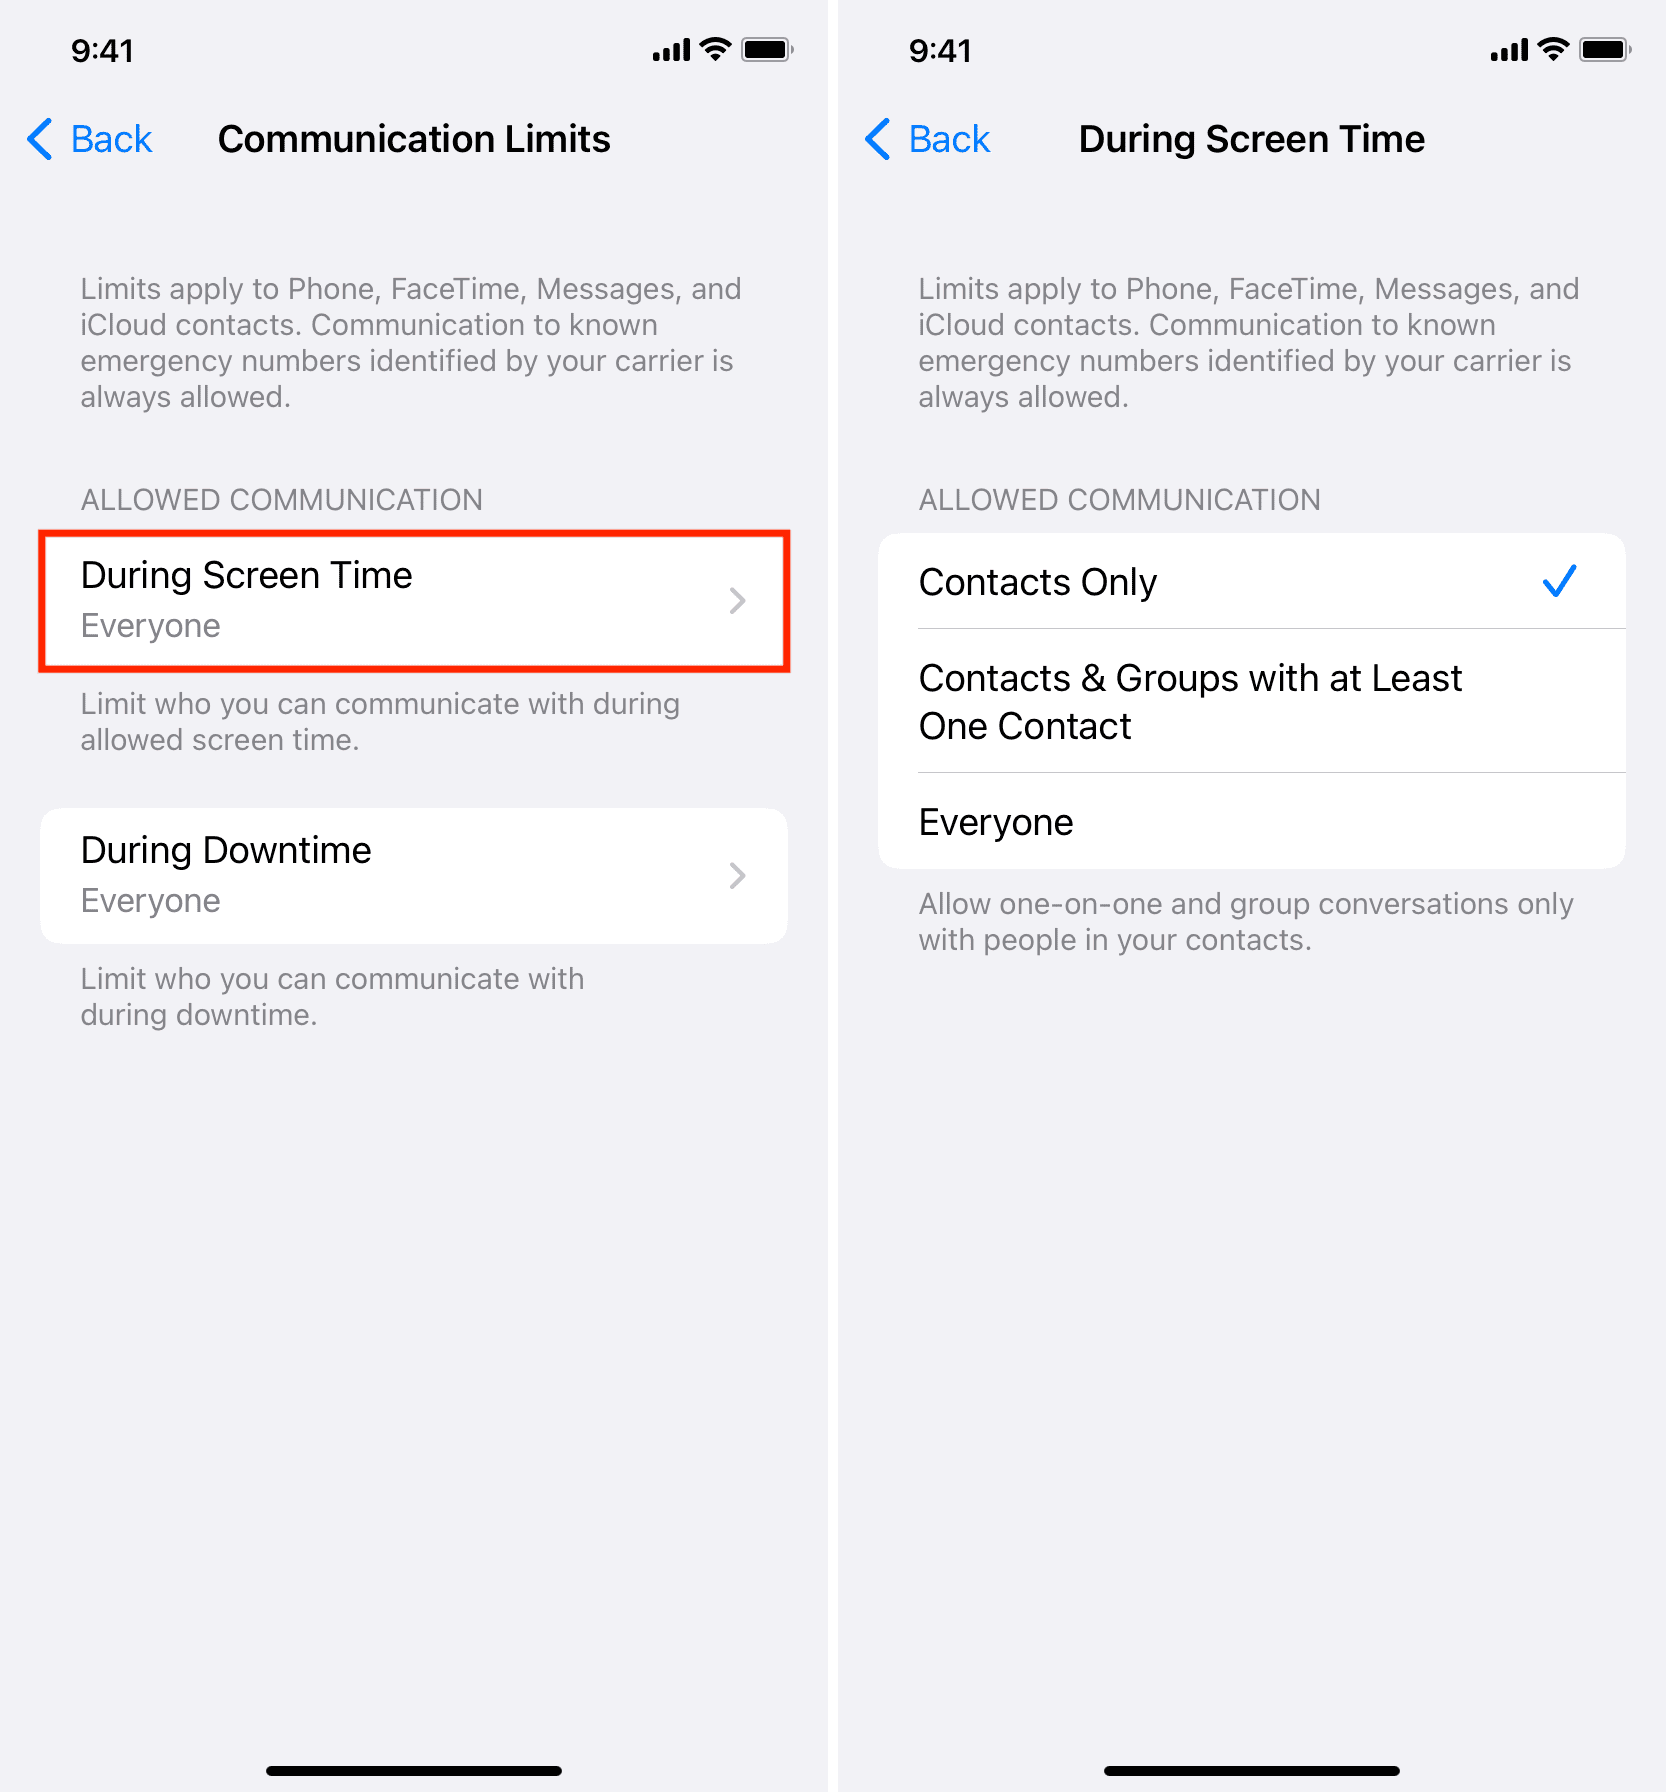 Contacts Only for During Screen Time limits on iPhone